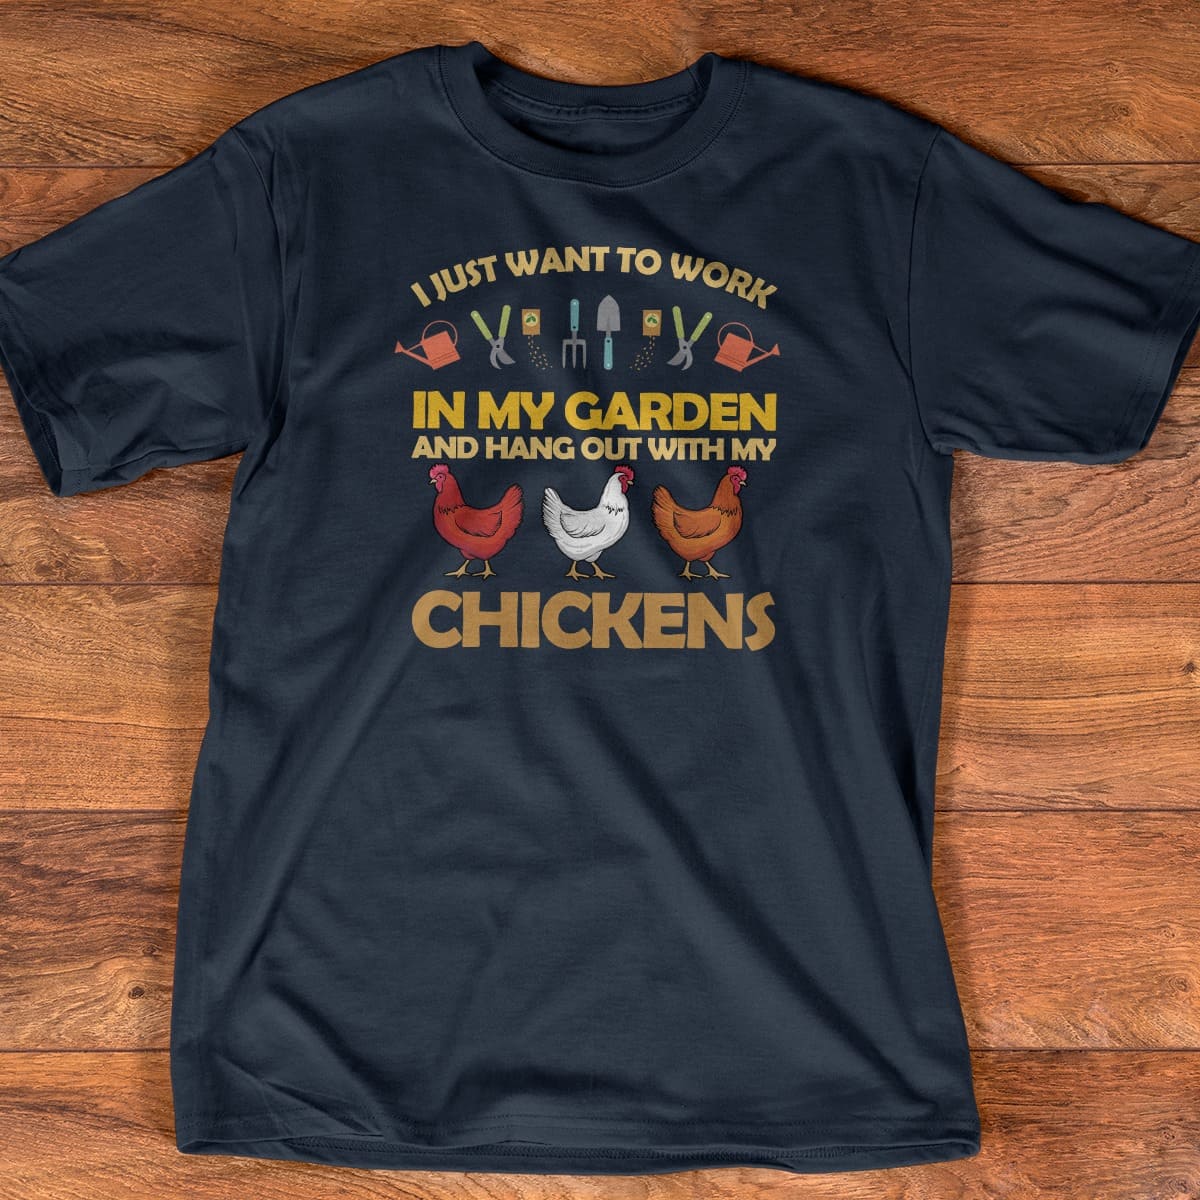 I just want to work in my garden and hang out with my chickens - Chickens and gardening